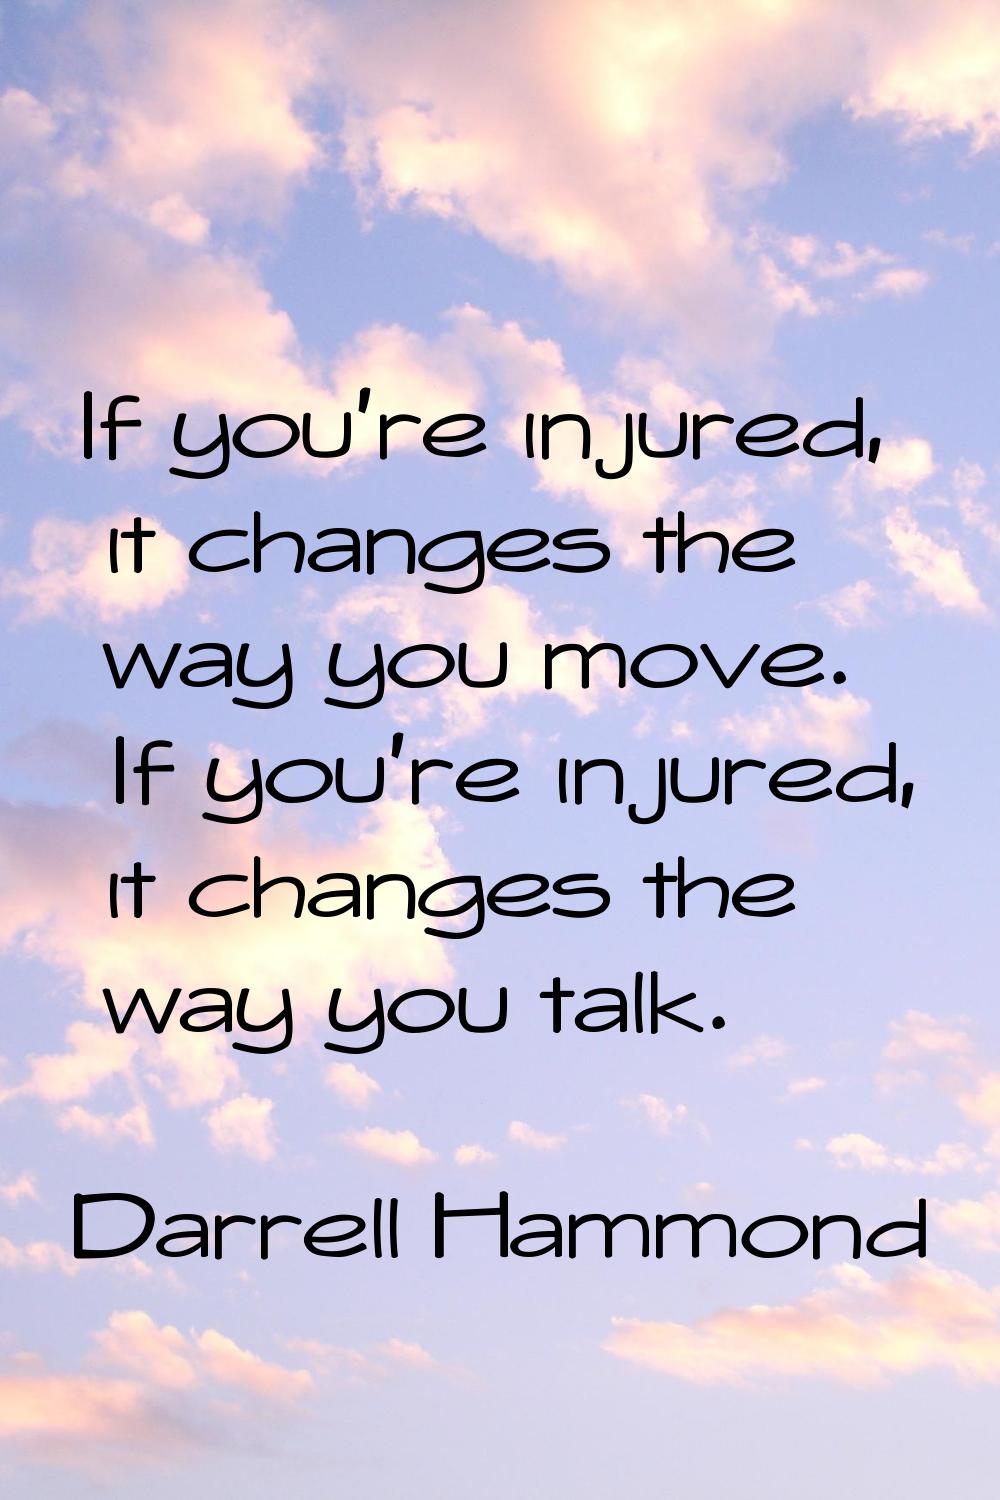 If you're injured, it changes the way you move. If you're injured, it changes the way you talk.